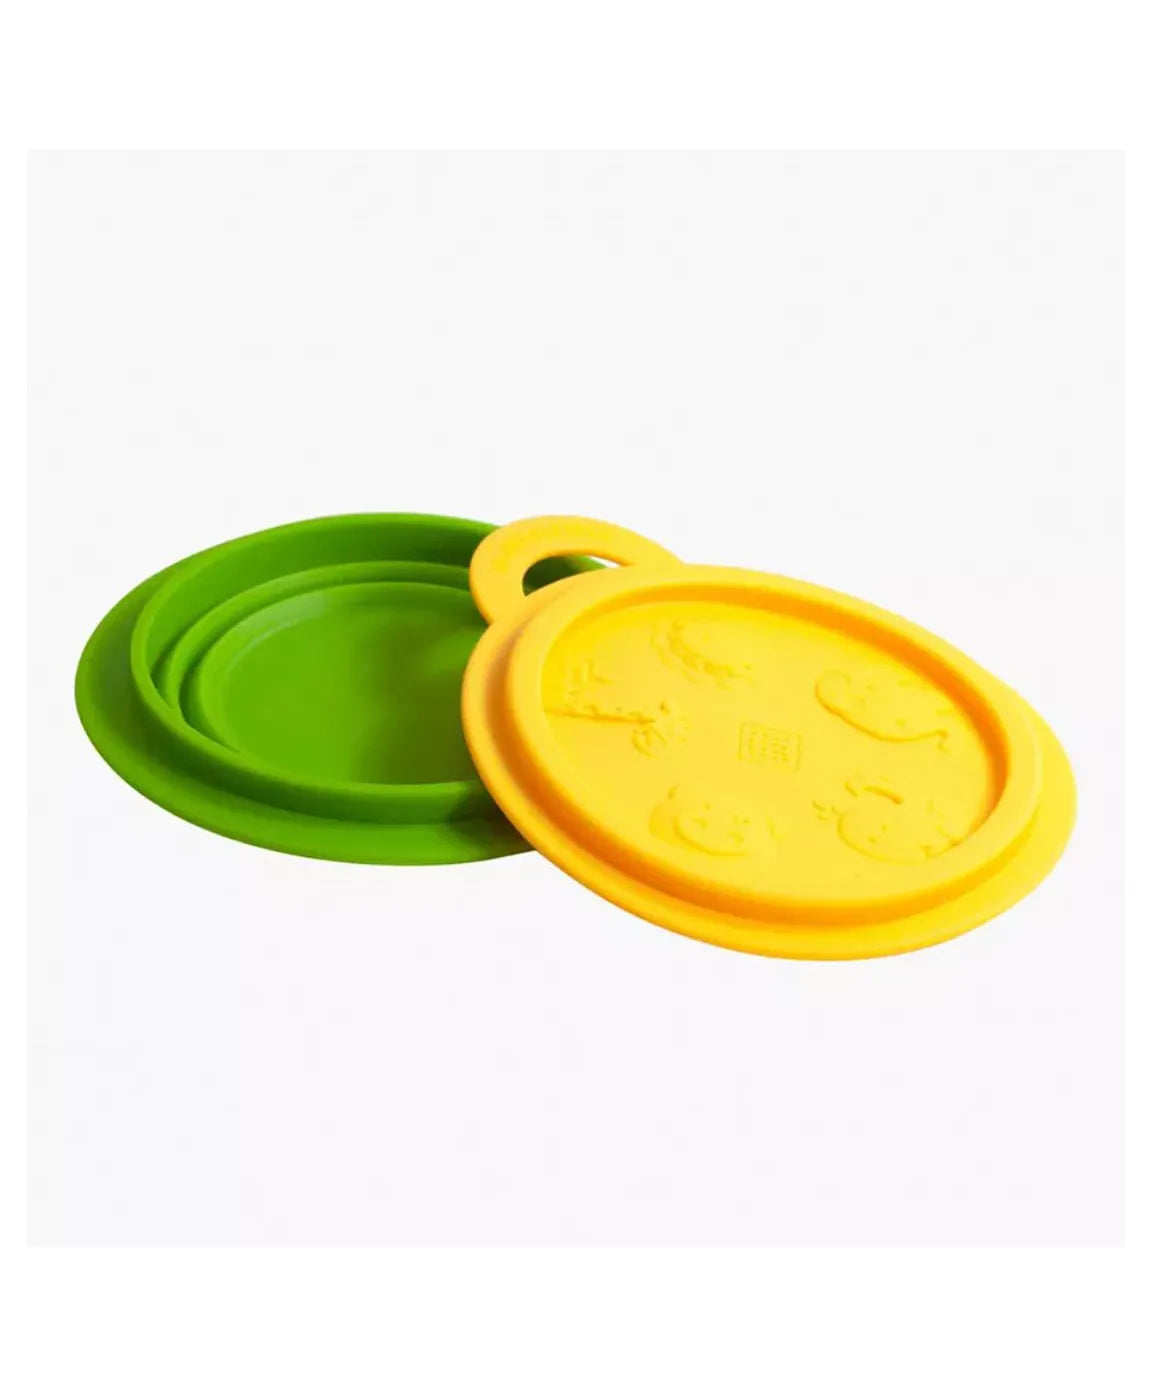 Marcus & Marcus - Silicone Collapsible Bowl - Lola - Laadlee